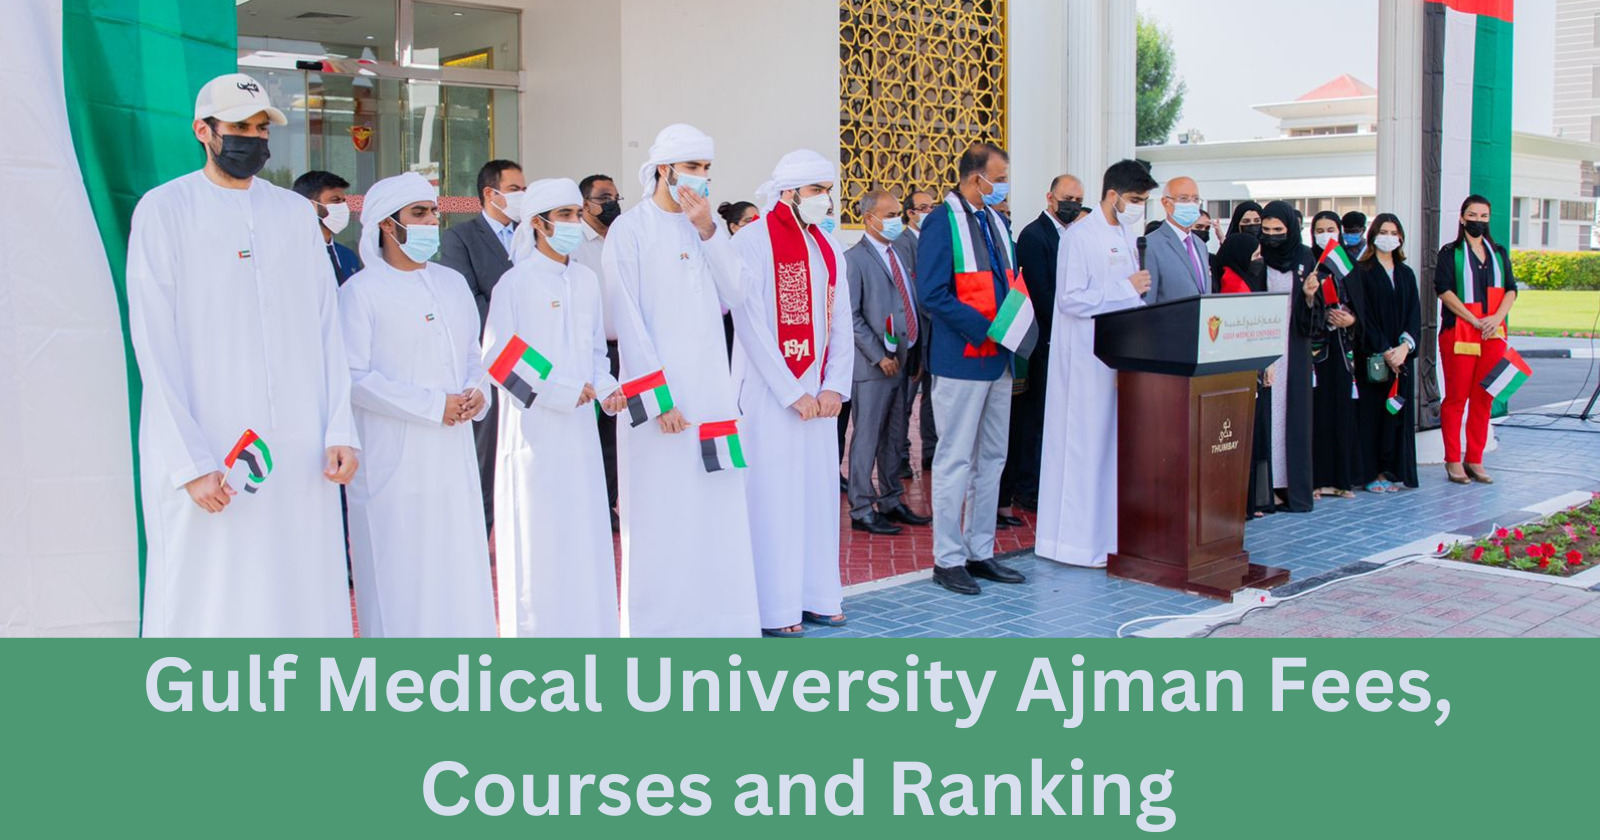 Gulf Medical University Ajman Fees, Courses and Ranking